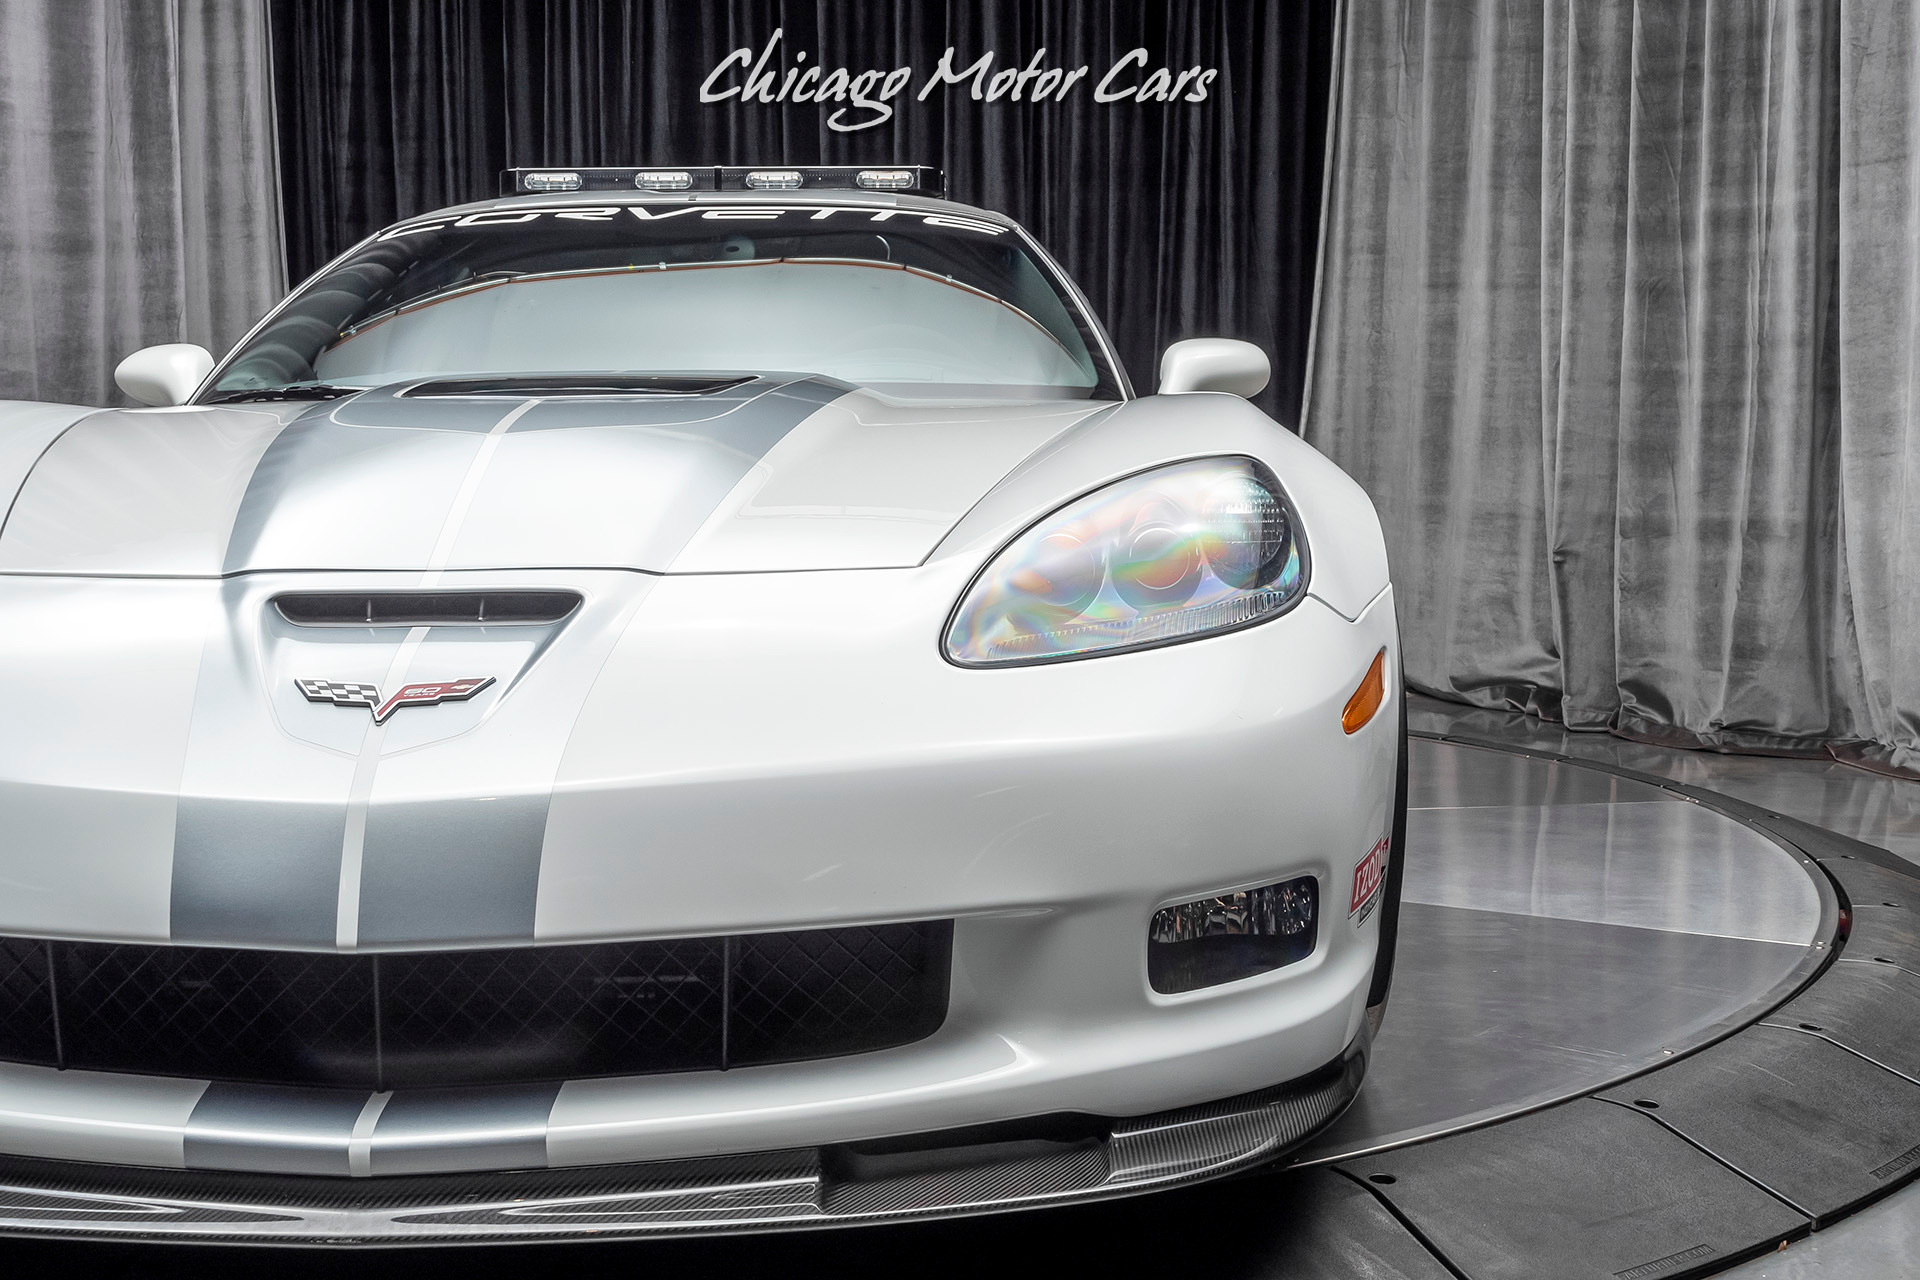 Used-2013-Chevrolet-Corvette-ZR1-3ZR-TRIBUTE-PACE-CAR-Only-1200-Miles